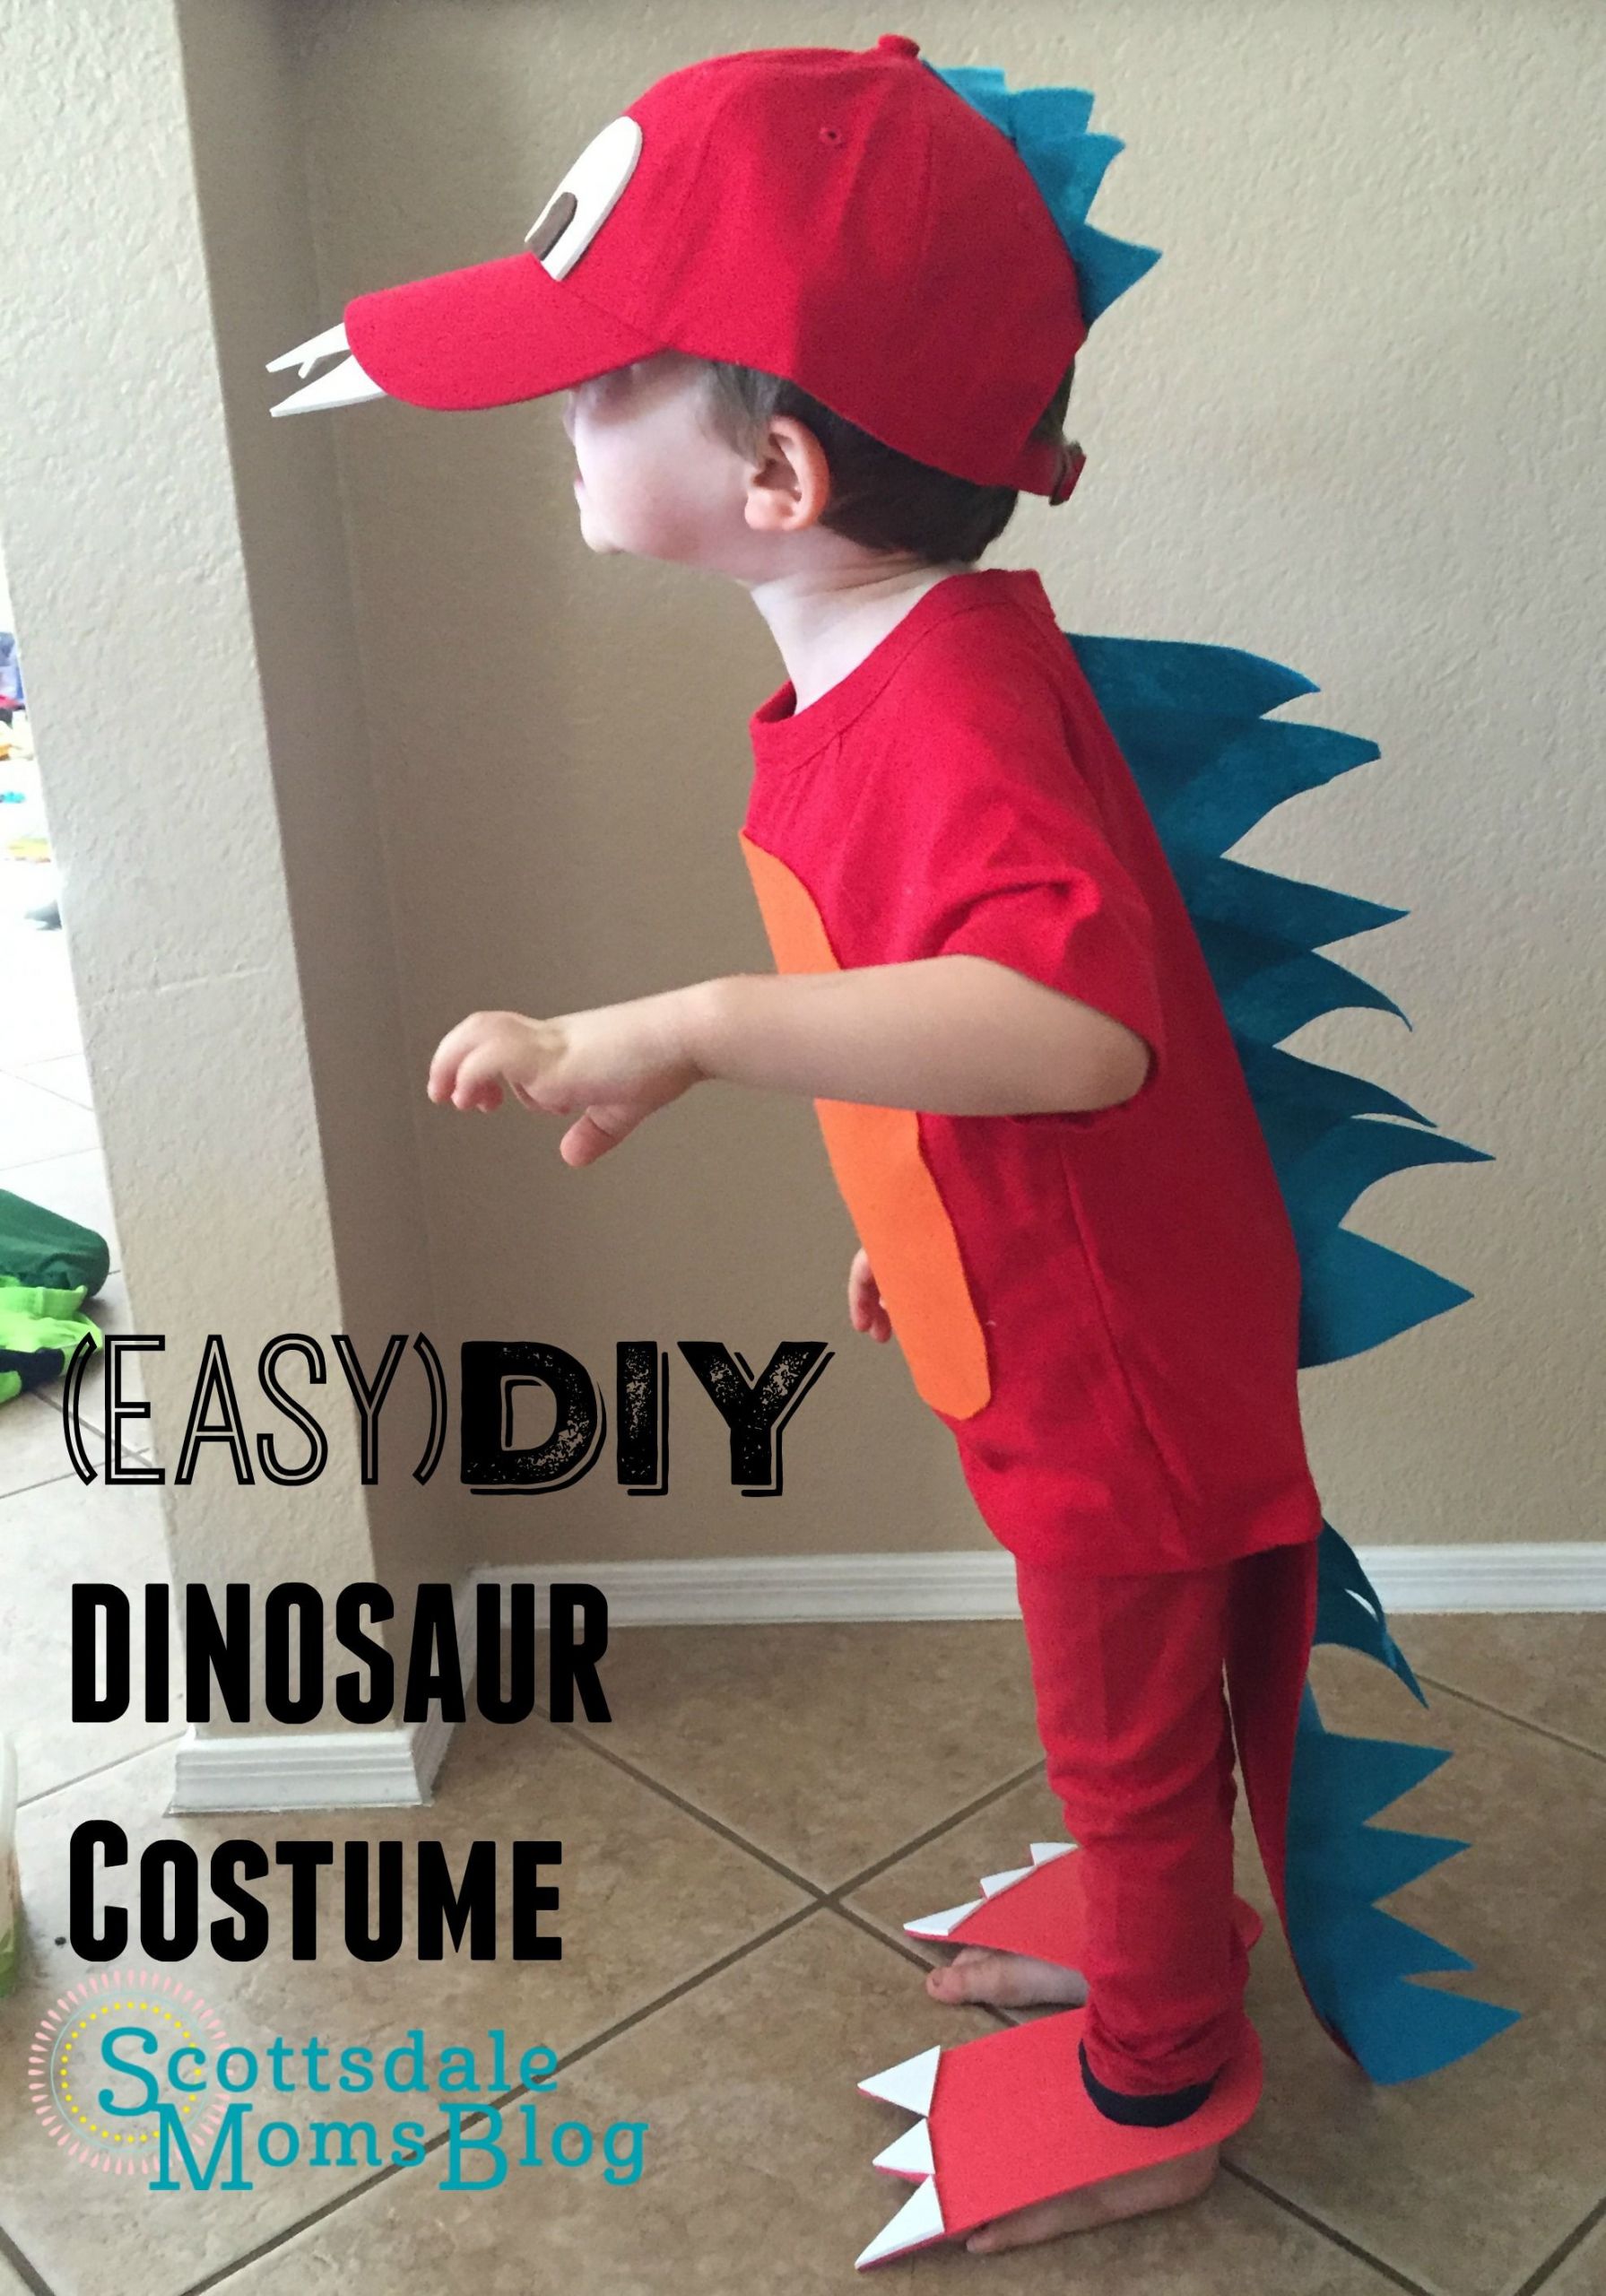 DIY Dinosaur Costume For Adults
 Tutorial on how to make an easy and adorable dinosaur